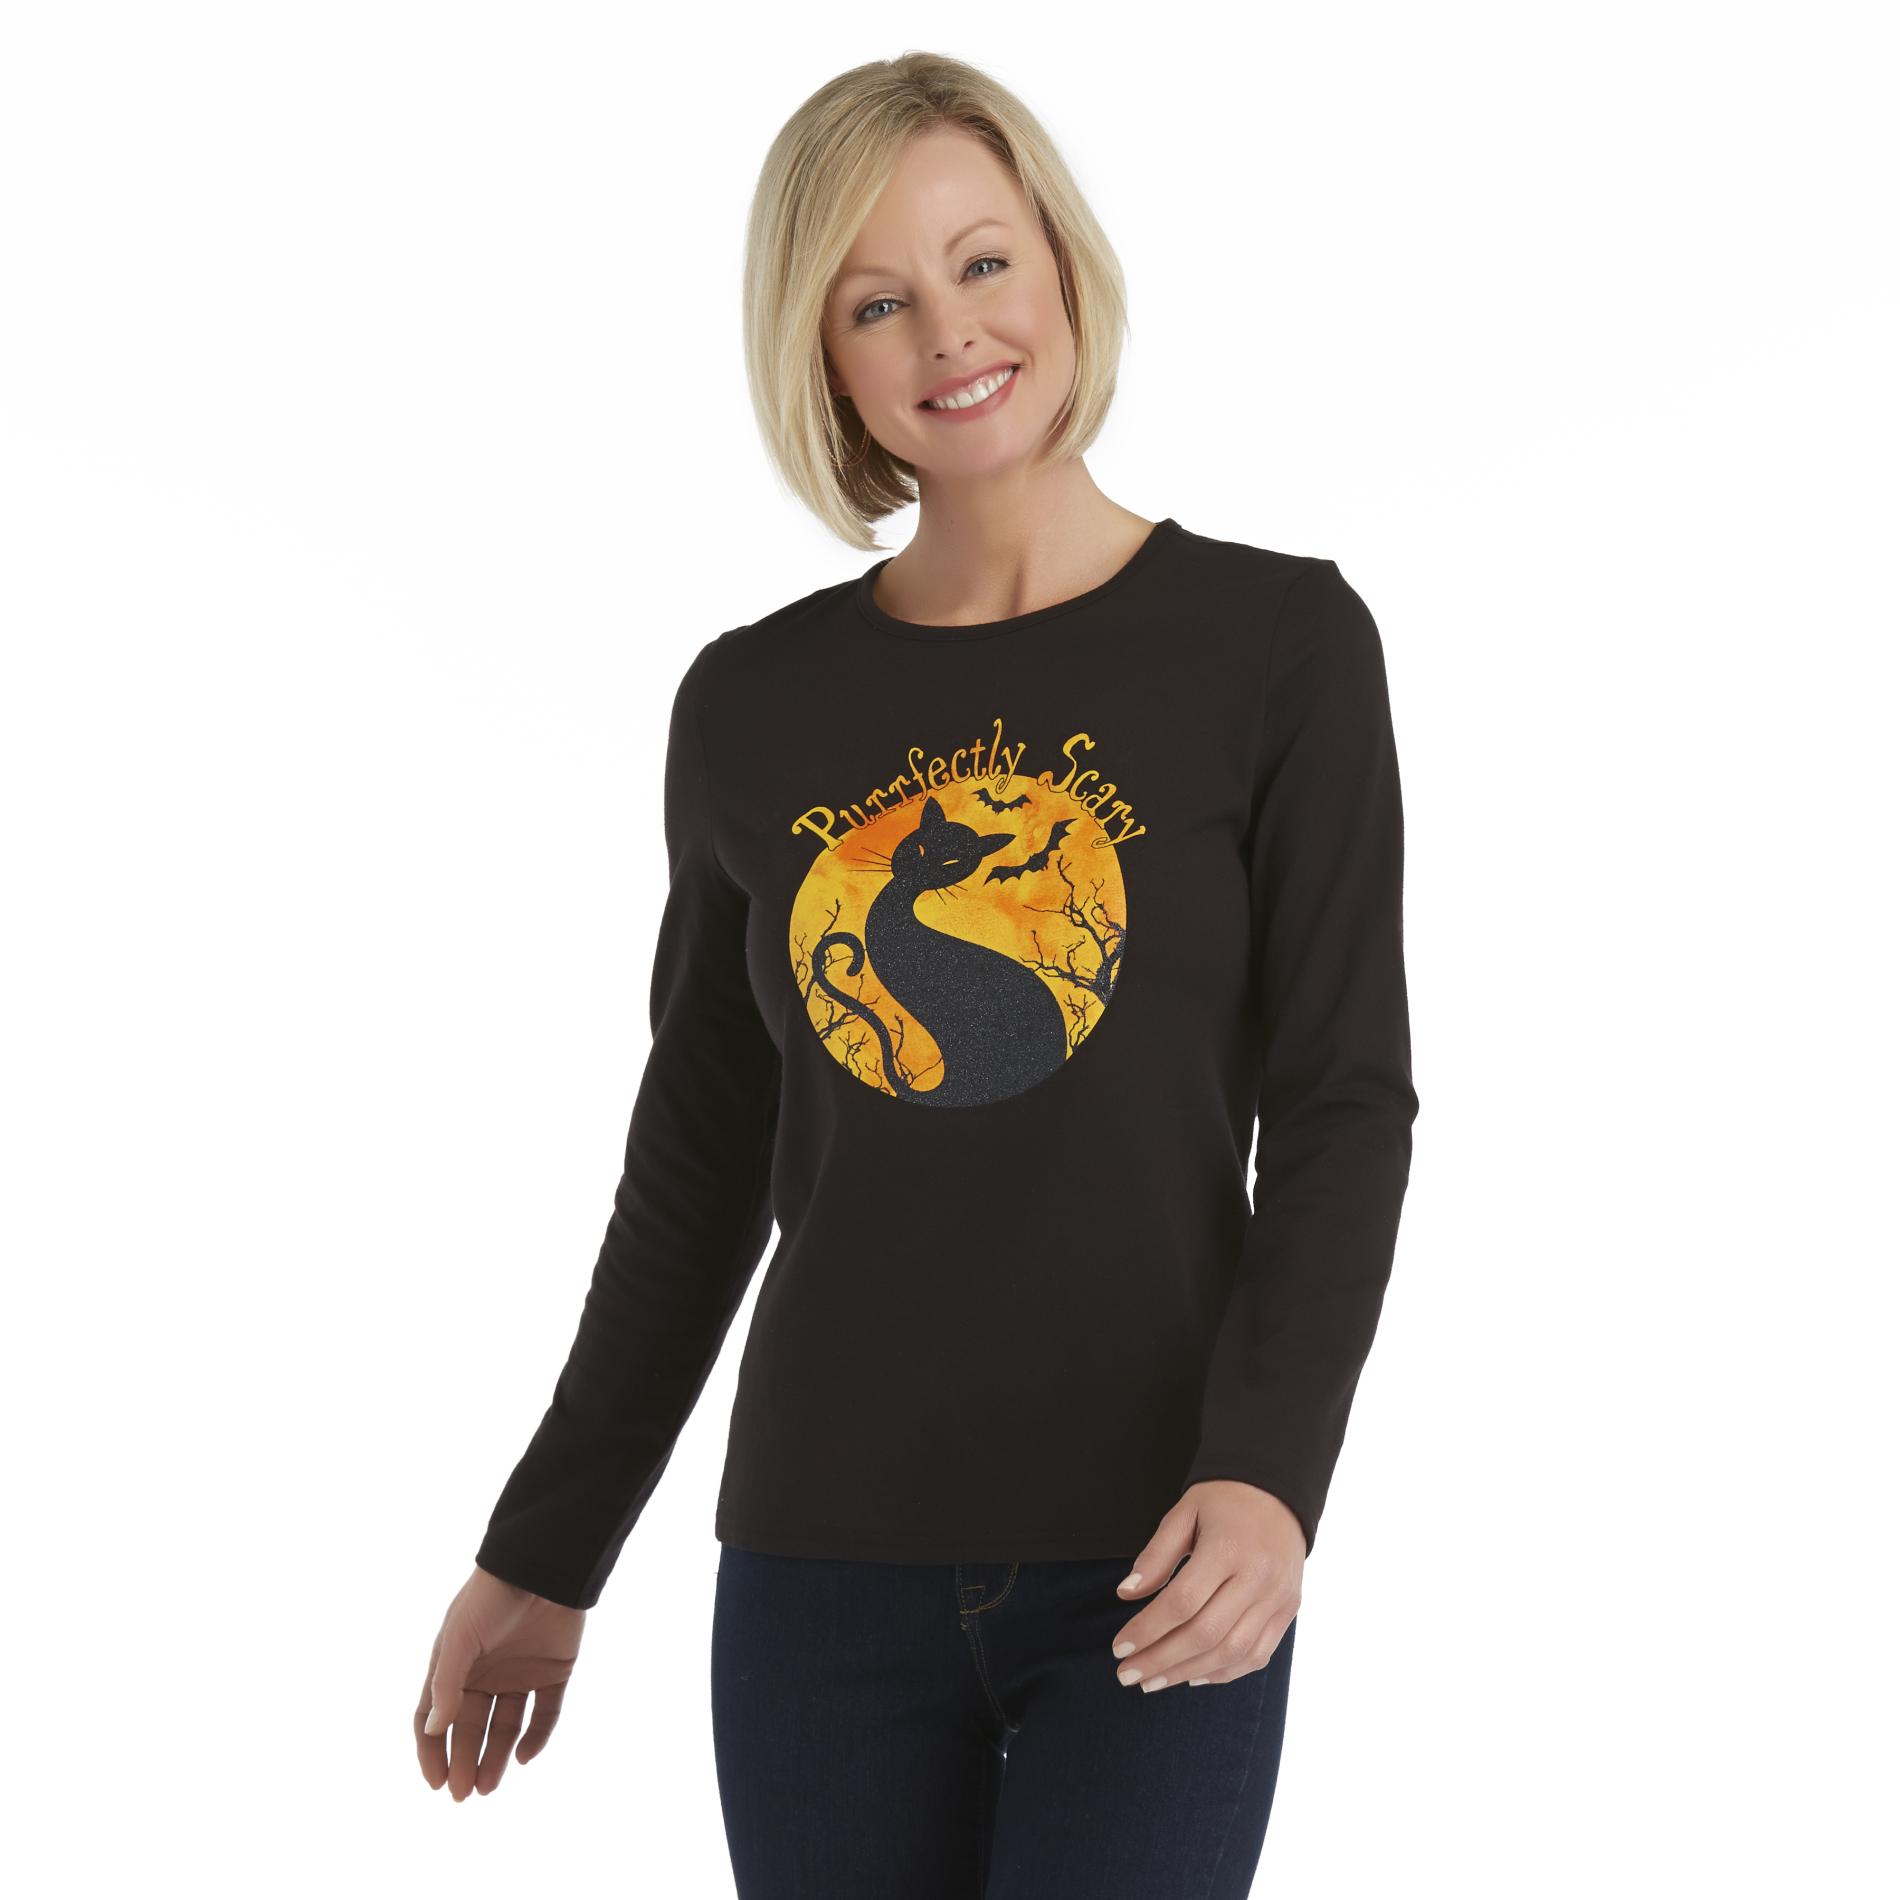 Holiday Editions Women's Halloween T-Shirt - Purrfectly Scary